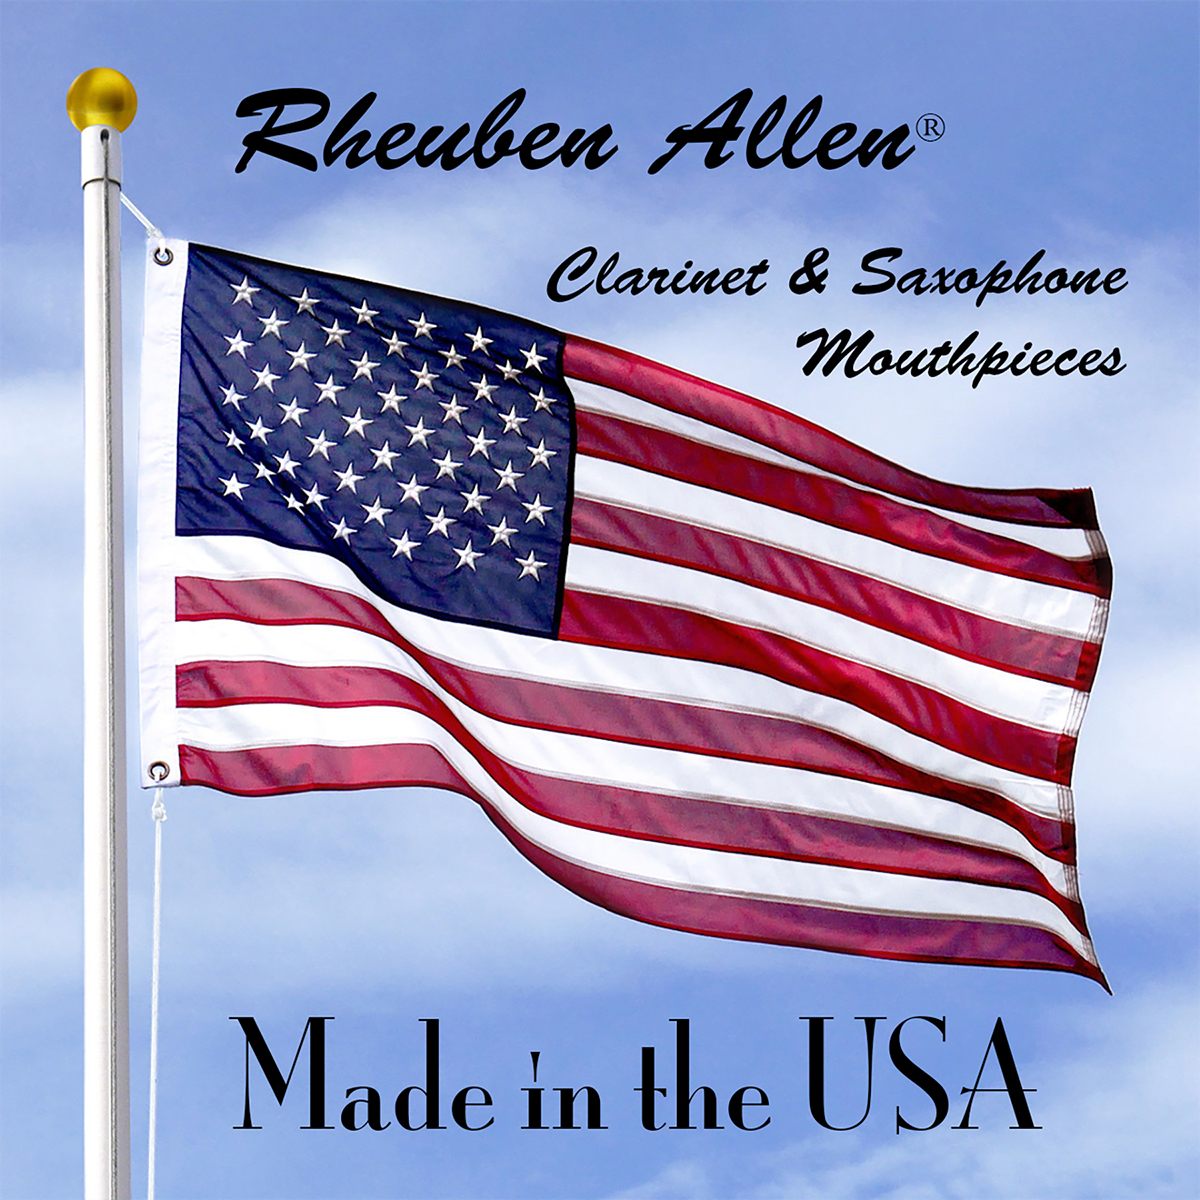 Rheuben Allen clarinet and saxophone mouthpieces are made in the Untied States of America